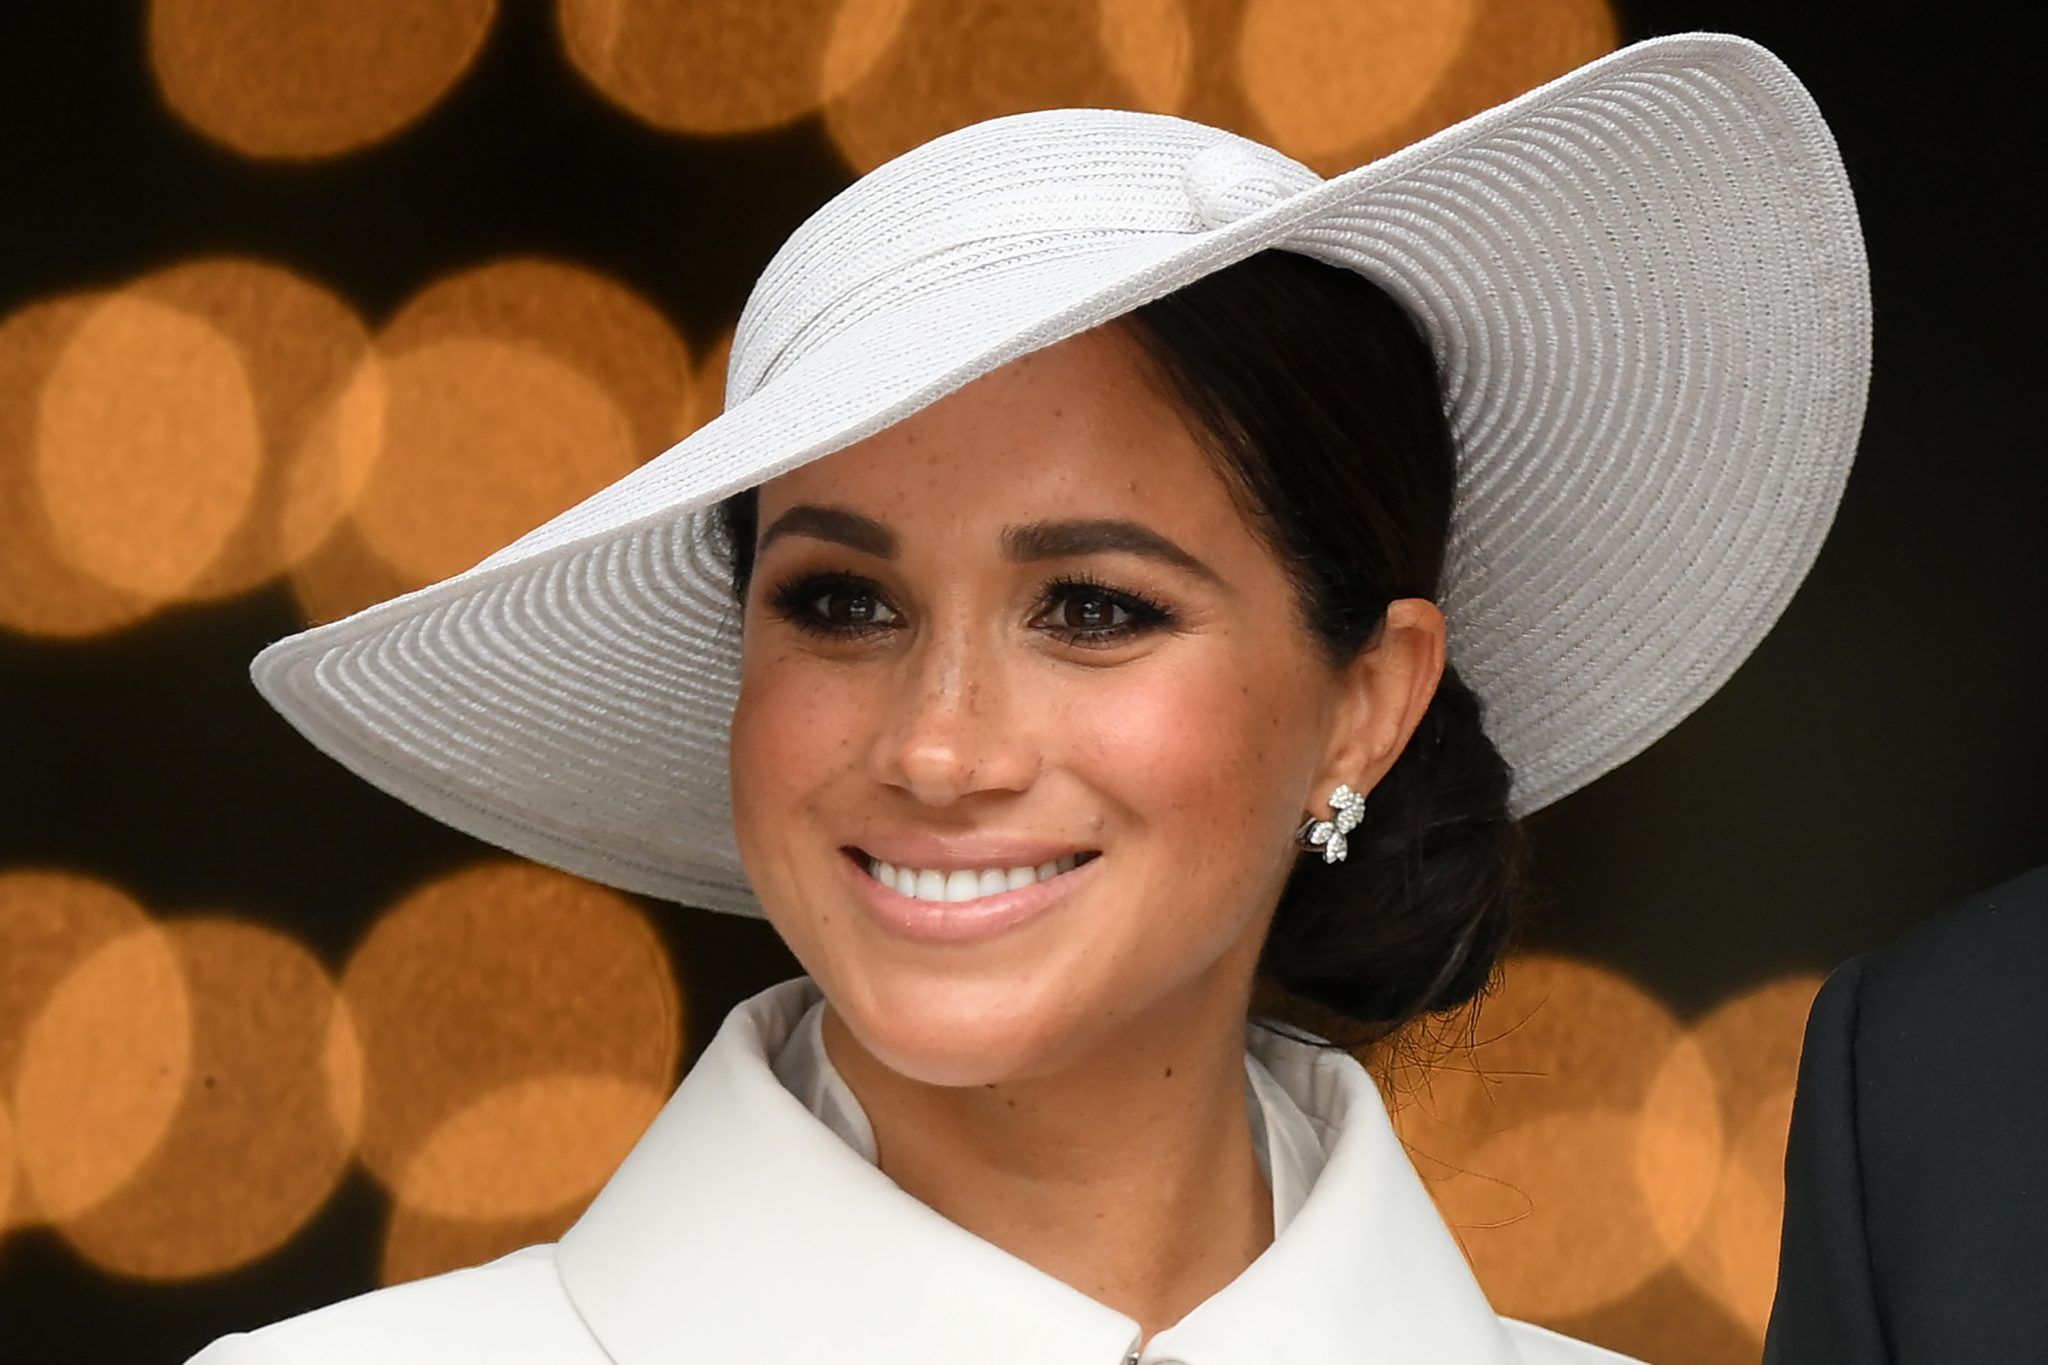 LONDON, ENGLAND - JUNE 03: Meghan, Duchess of Sussex leaves after attending the National Service of Thanksgiving to Celebrate the Platinum Jubilee of Her Majesty The Queen at St Paul's Cathedral on June 3, 2022 in London, England. The Platinum Jubilee of Elizabeth II is being celebrated from June 2 to June 5, 2022, in the UK and Commonwealth to mark the 70th anniversary of the accession of Queen Elizabeth II on 6 February 1952. (Photo by Daniel Leal - WPA Pool/Getty Images)